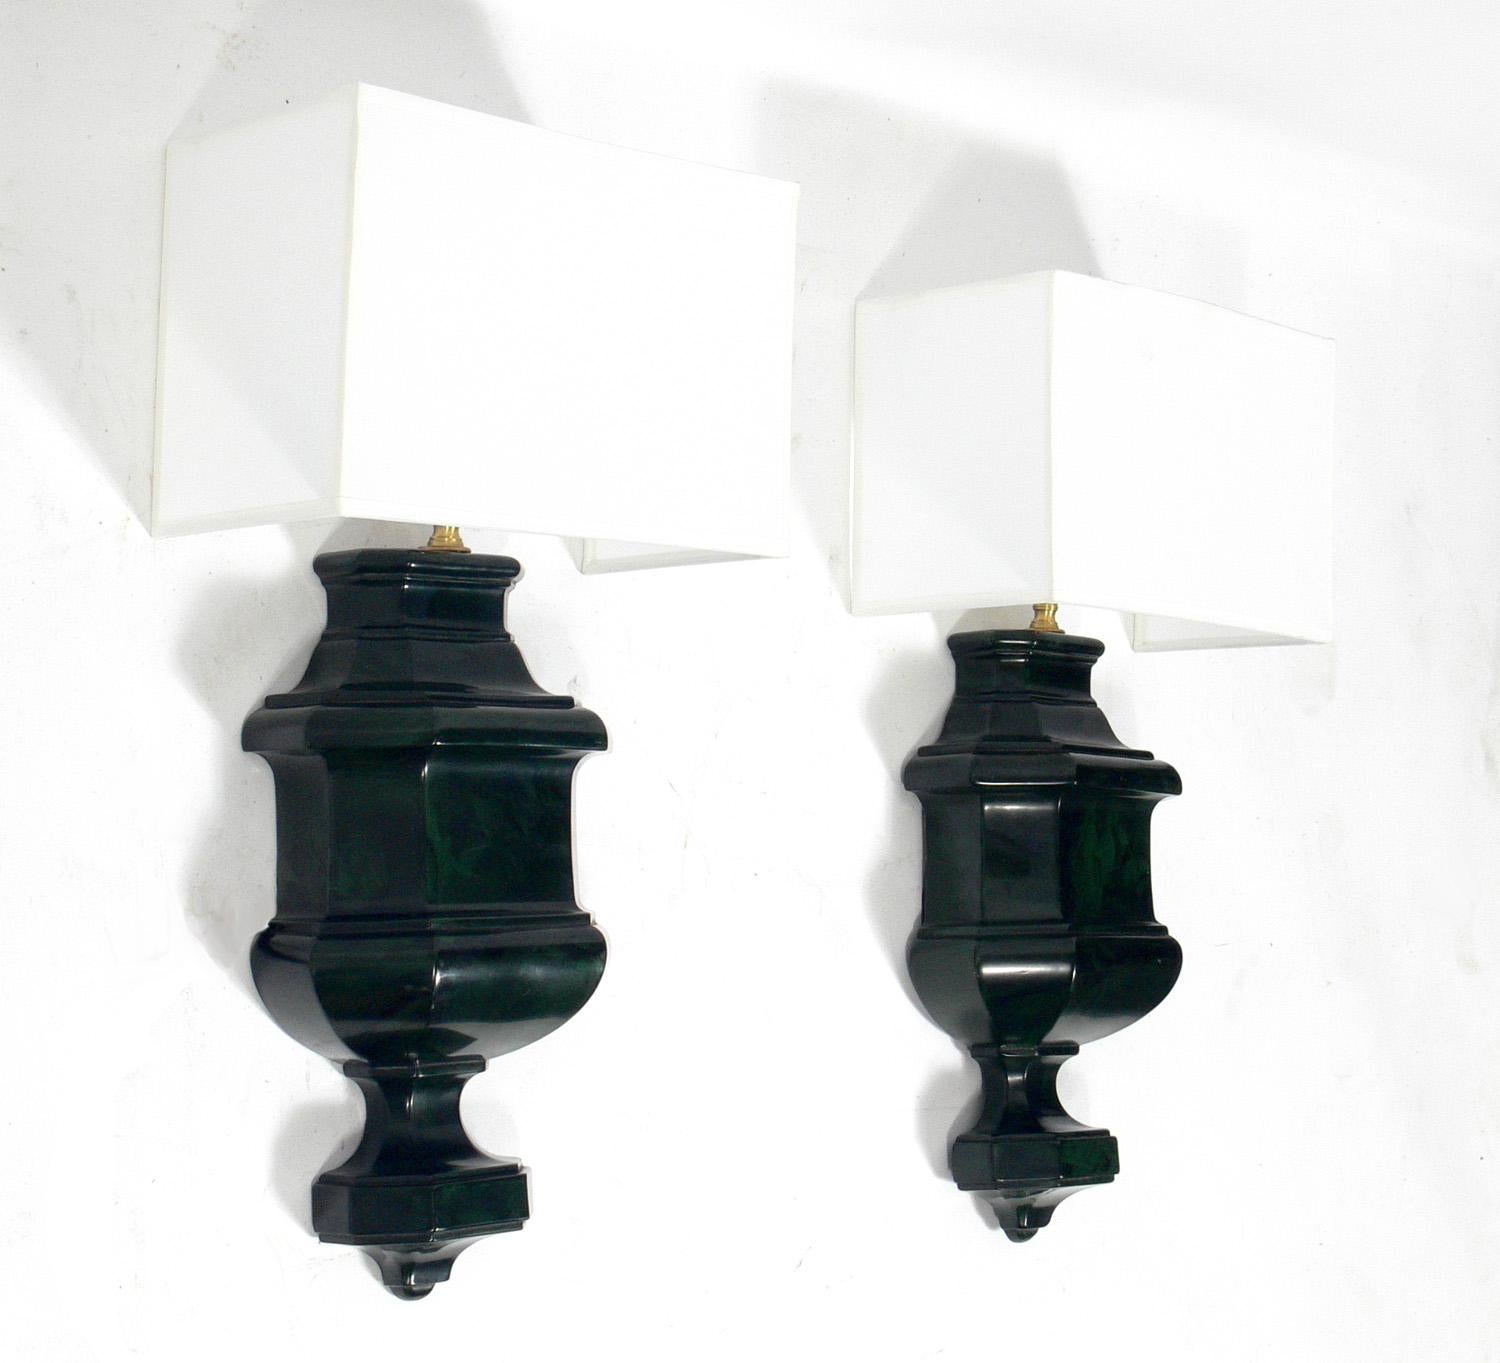 Pair of faux green marble resin sconces, circa 1980s. They have been rewired and are ready to use. The price noted below includes the shades.